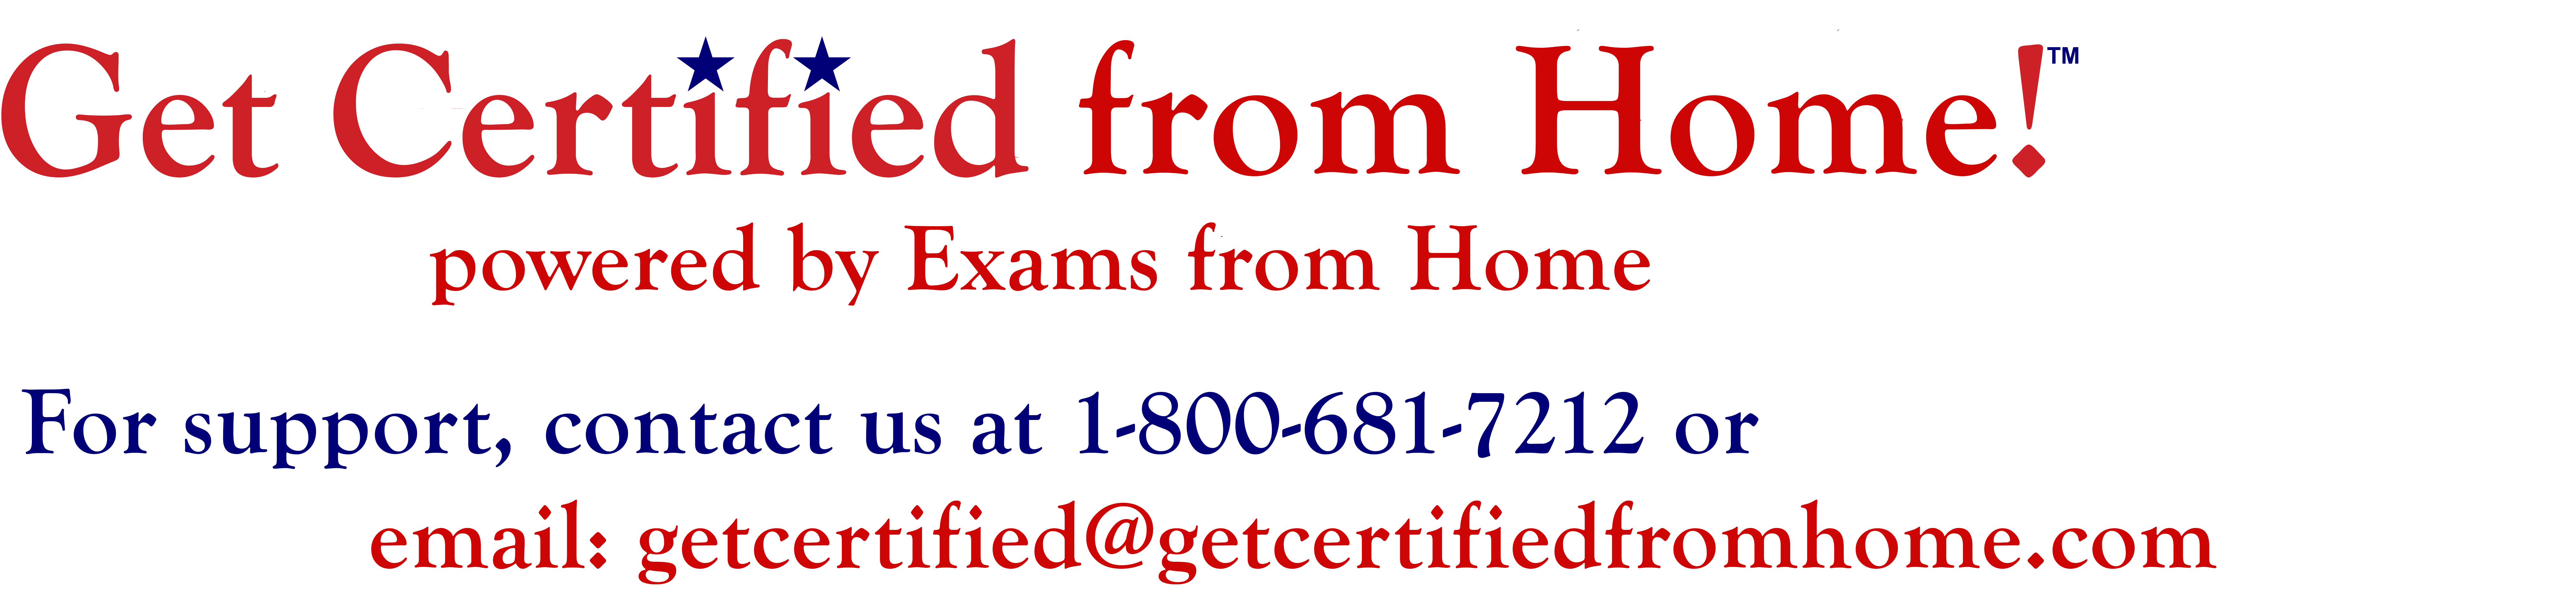 Get Certified from Home